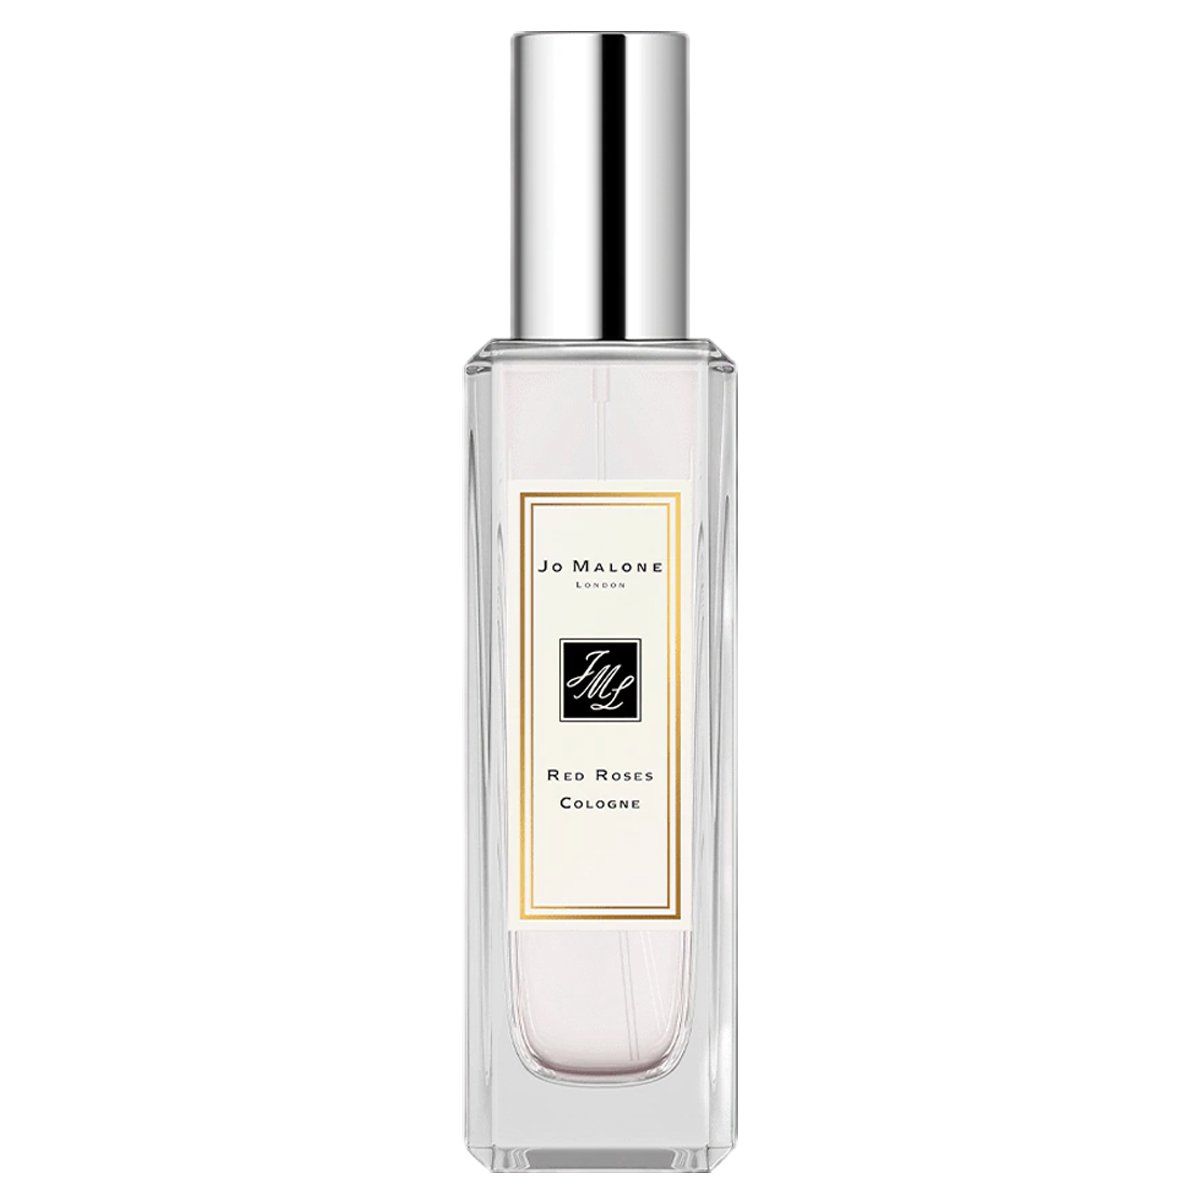  Jo Malone London Red Roses Cologne 